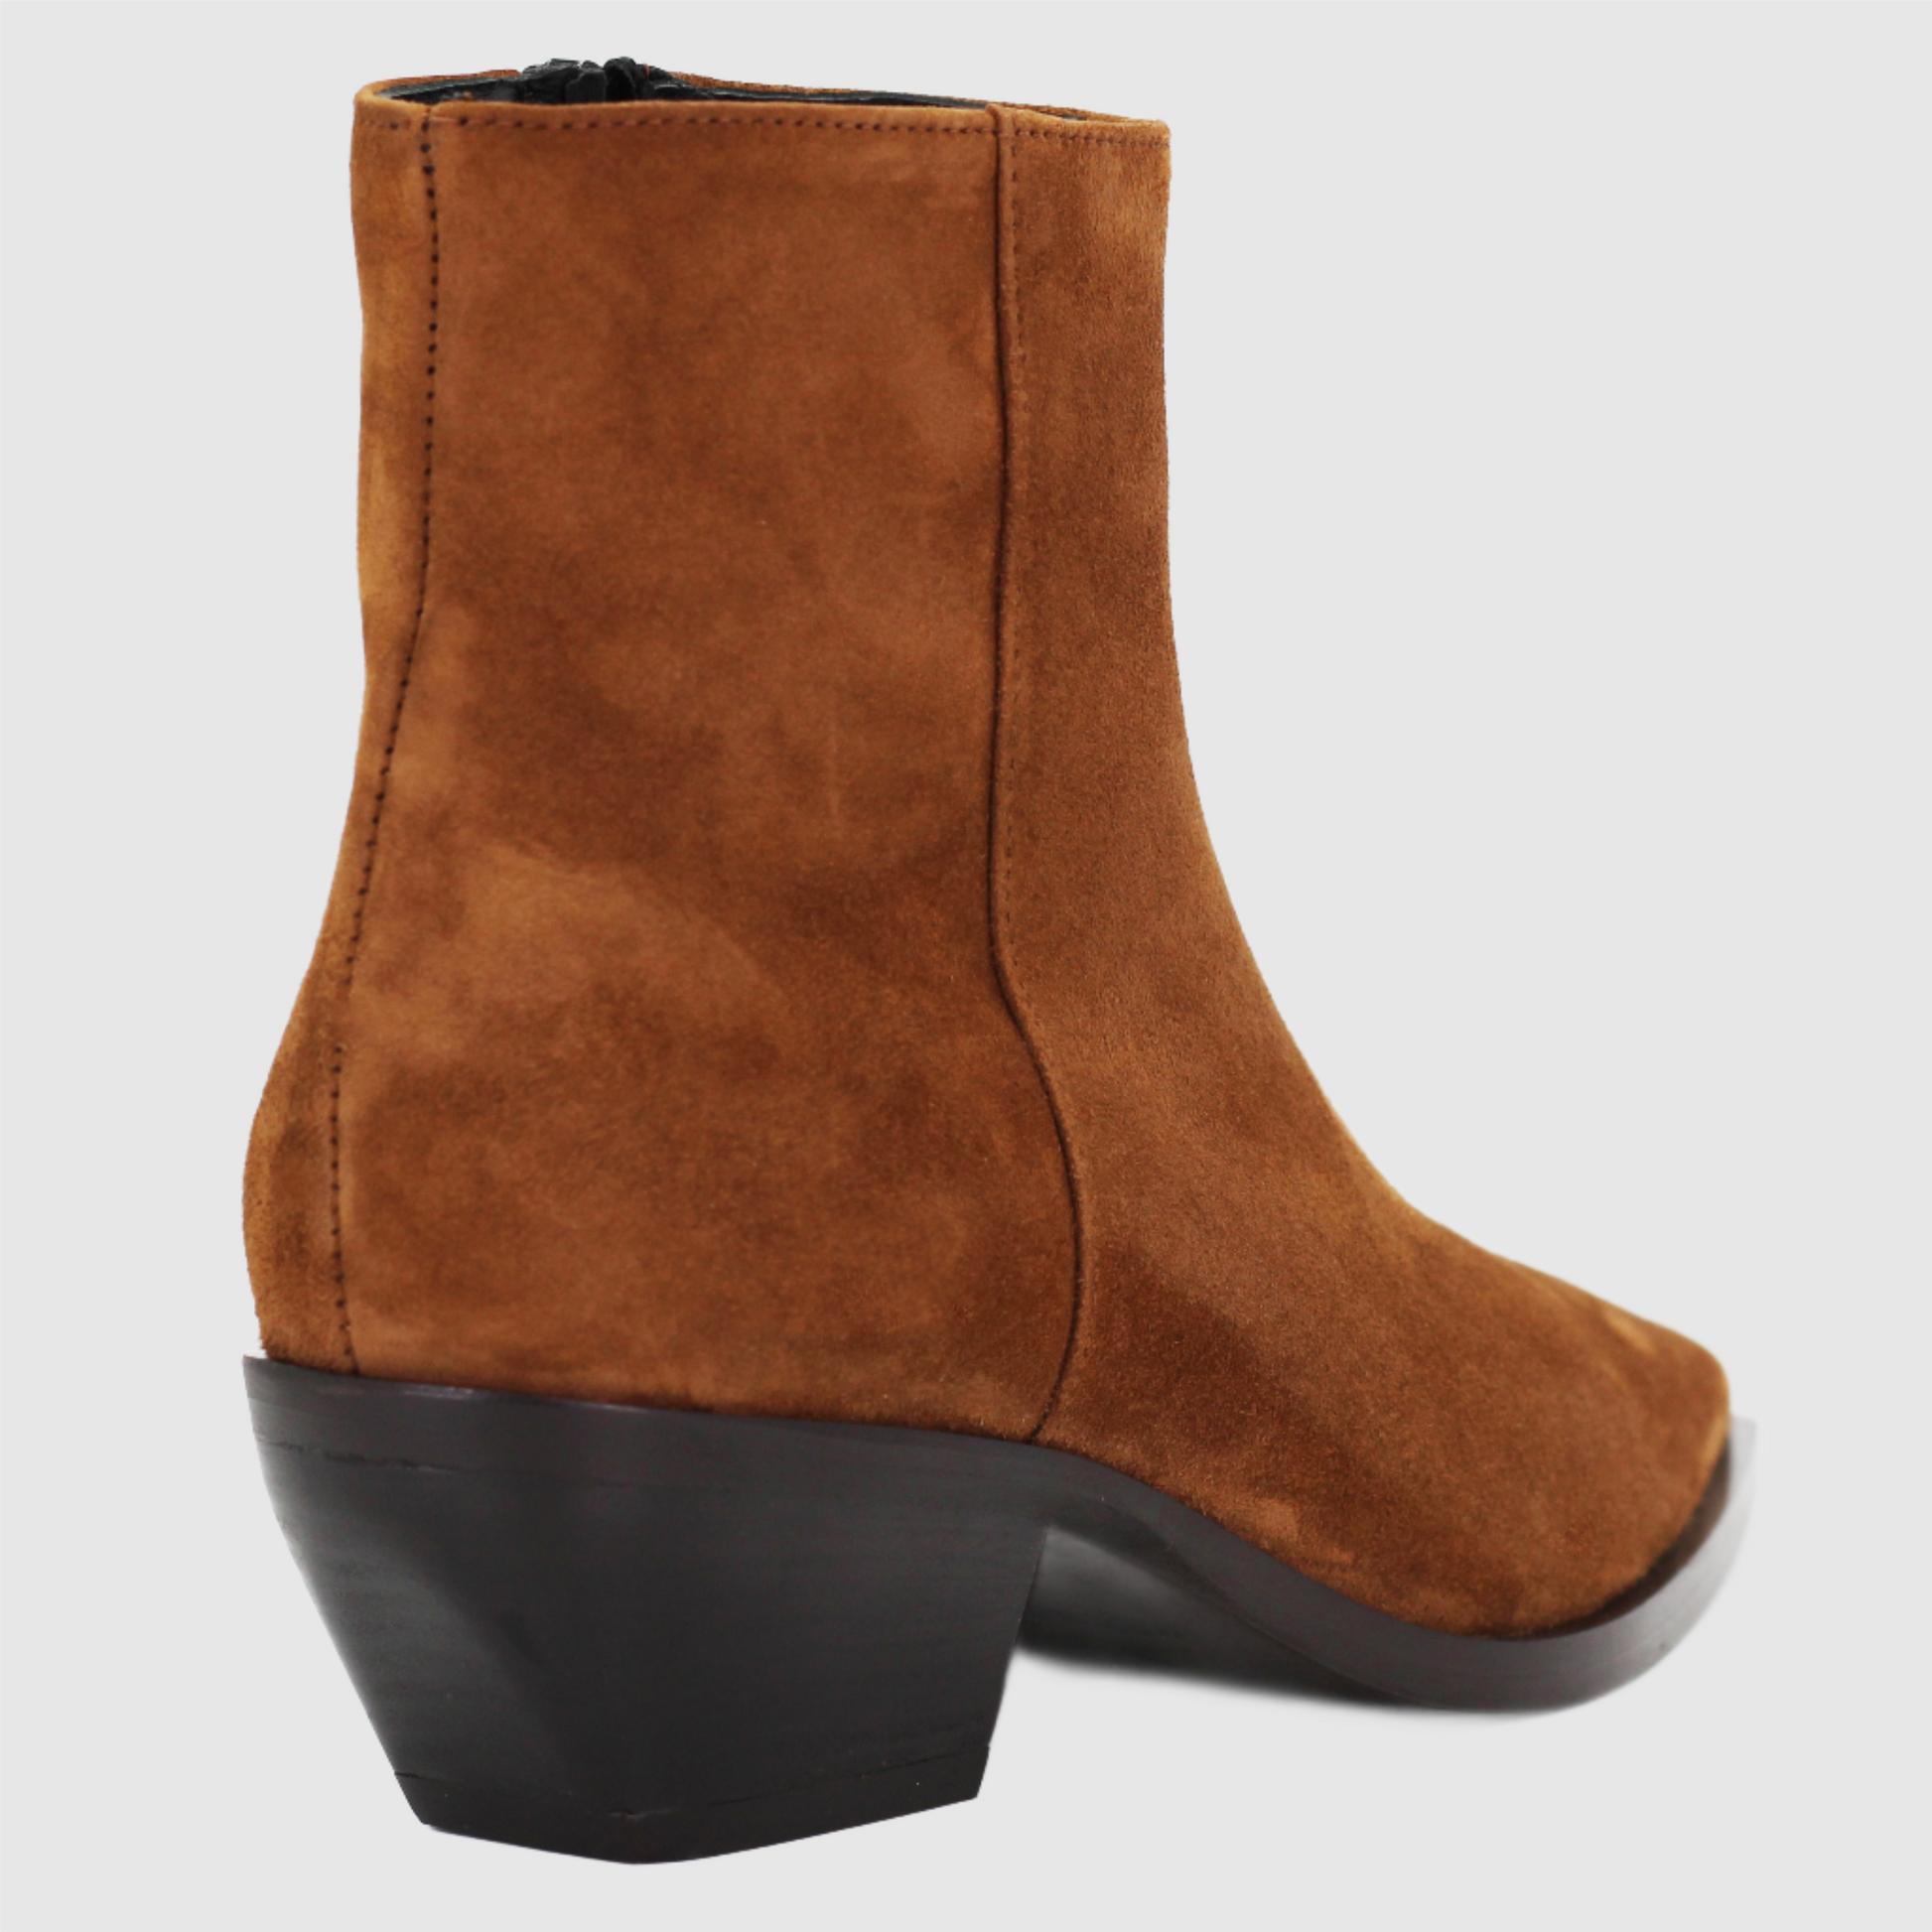 Shop Handmade Italian Leather ankle boot in sigaro (KRIA3) or browse our range of hand-made Italian shoes in leather or suede in-store at Aliverti Cape Town, or shop online. We deliver in South Africa & offer multiple payment plans as well as accept multiple safe & secure payment methods.